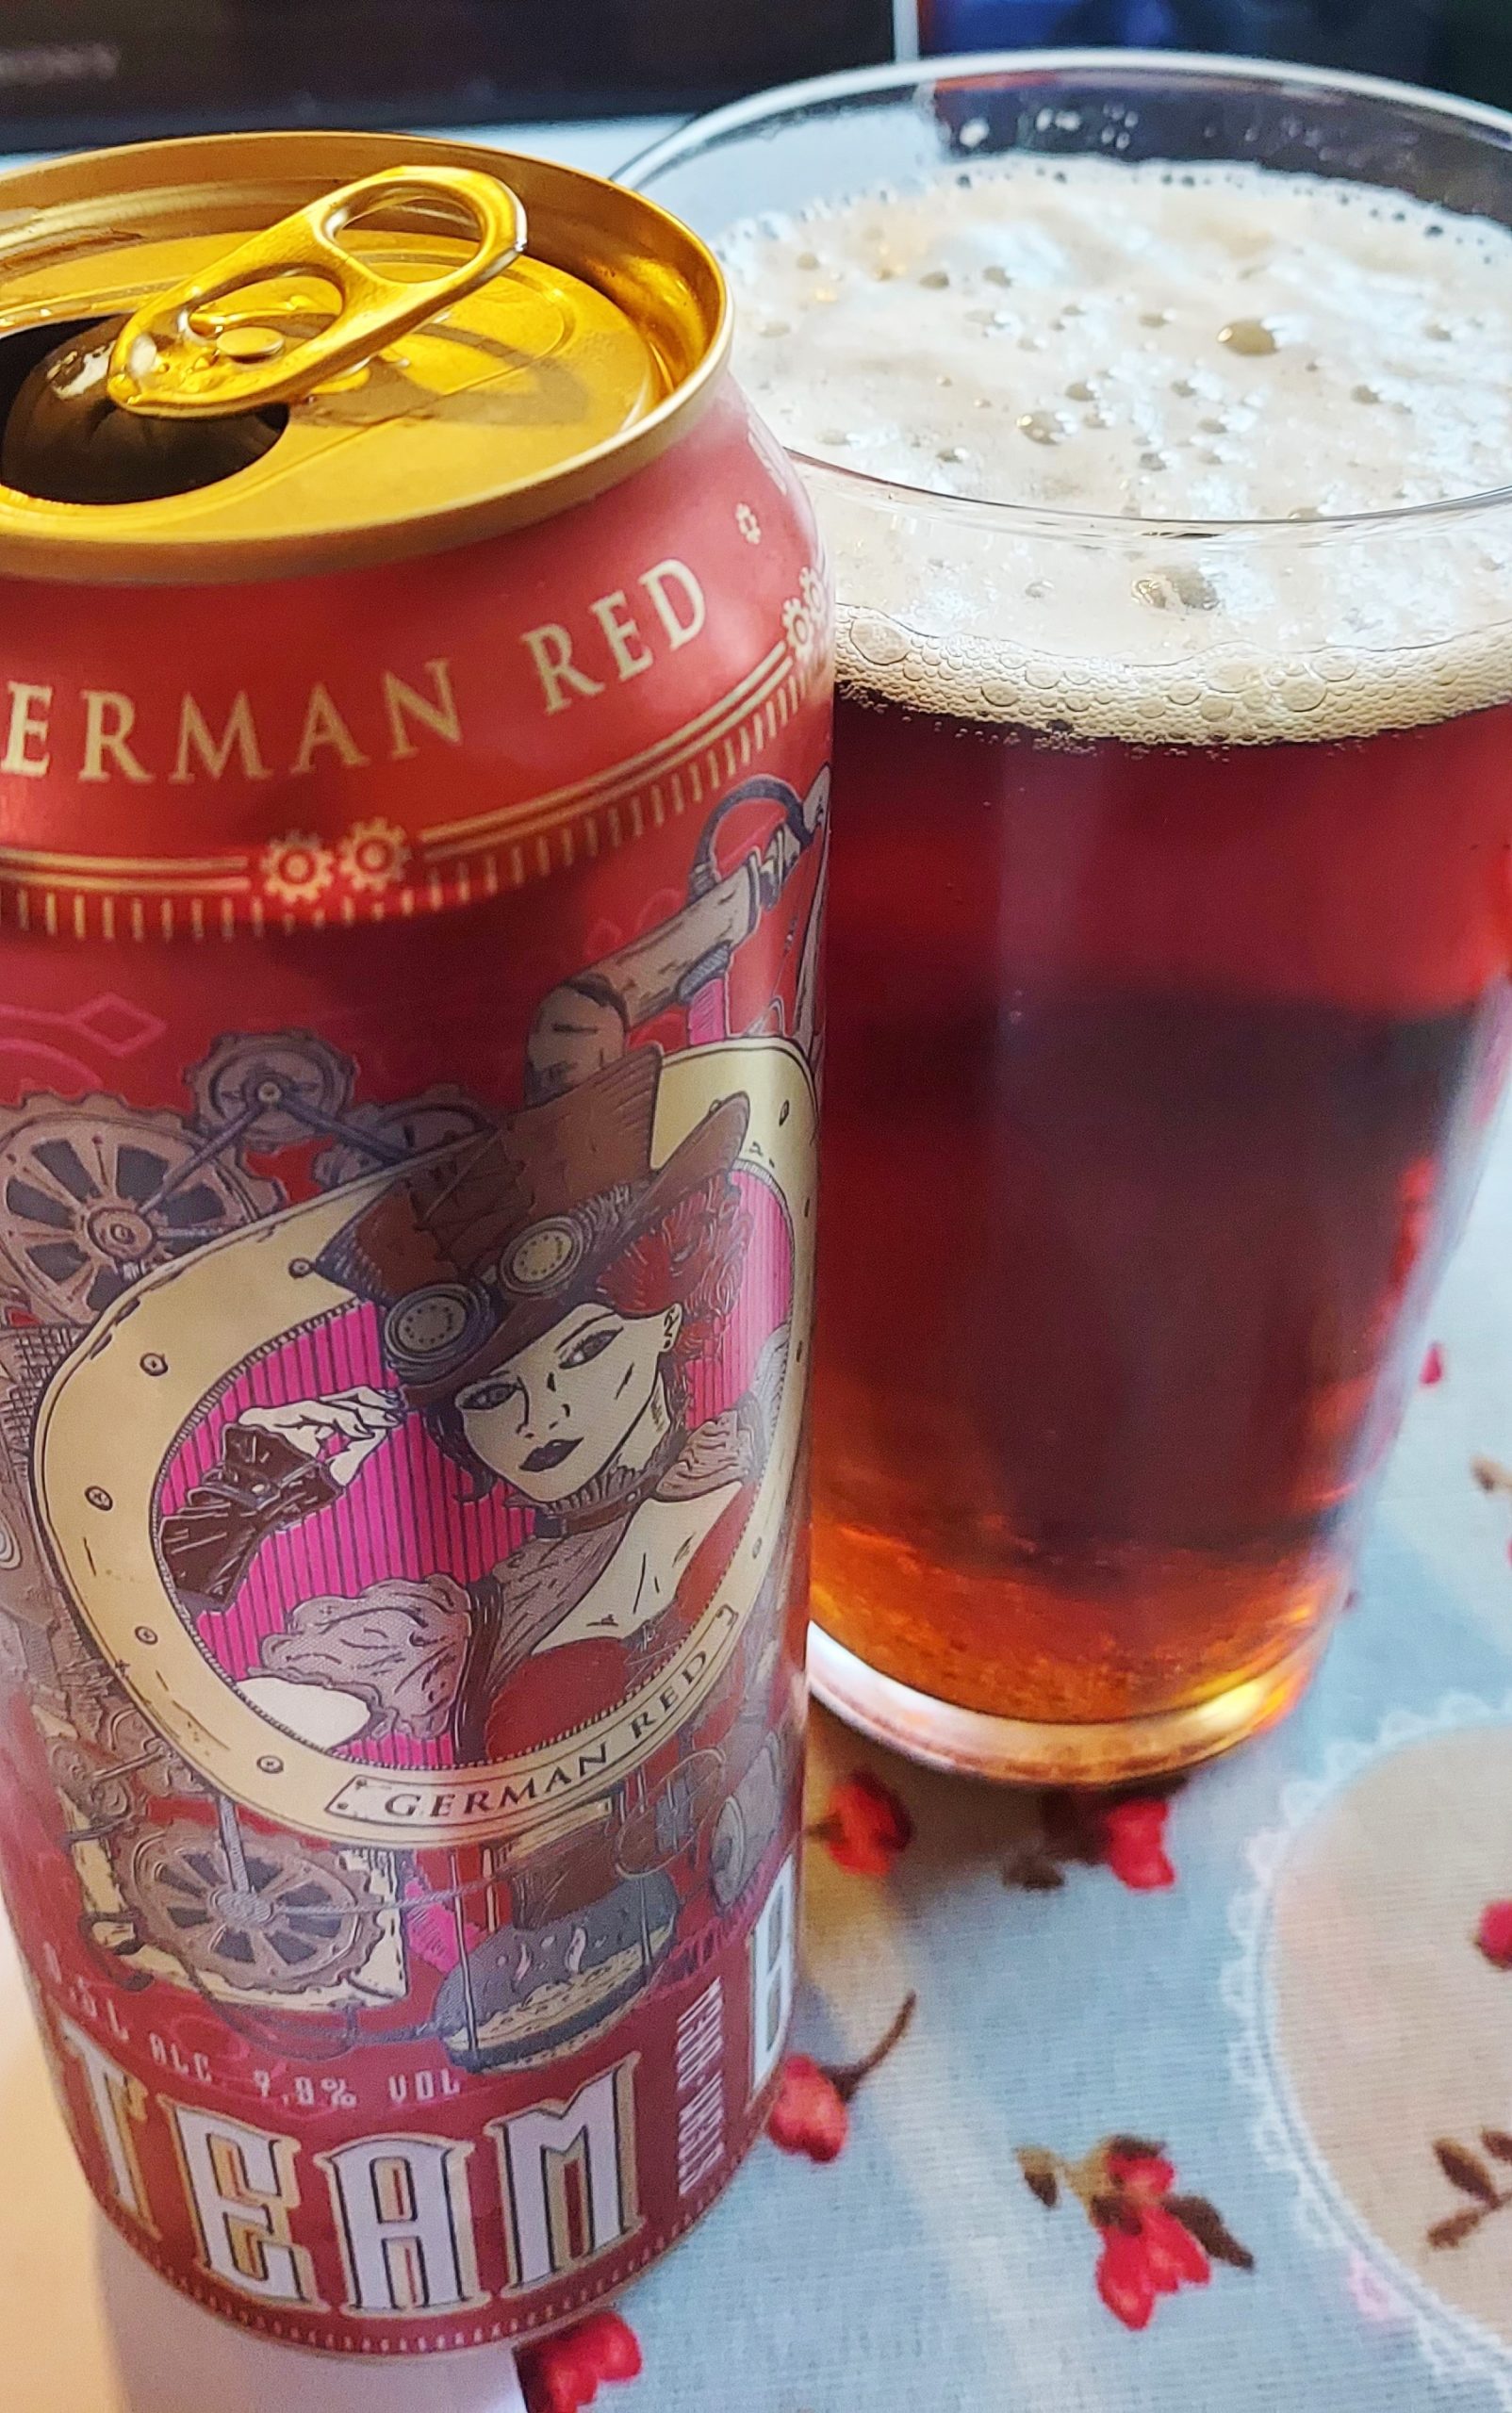 Steam Brew German Red - This Drinking Life